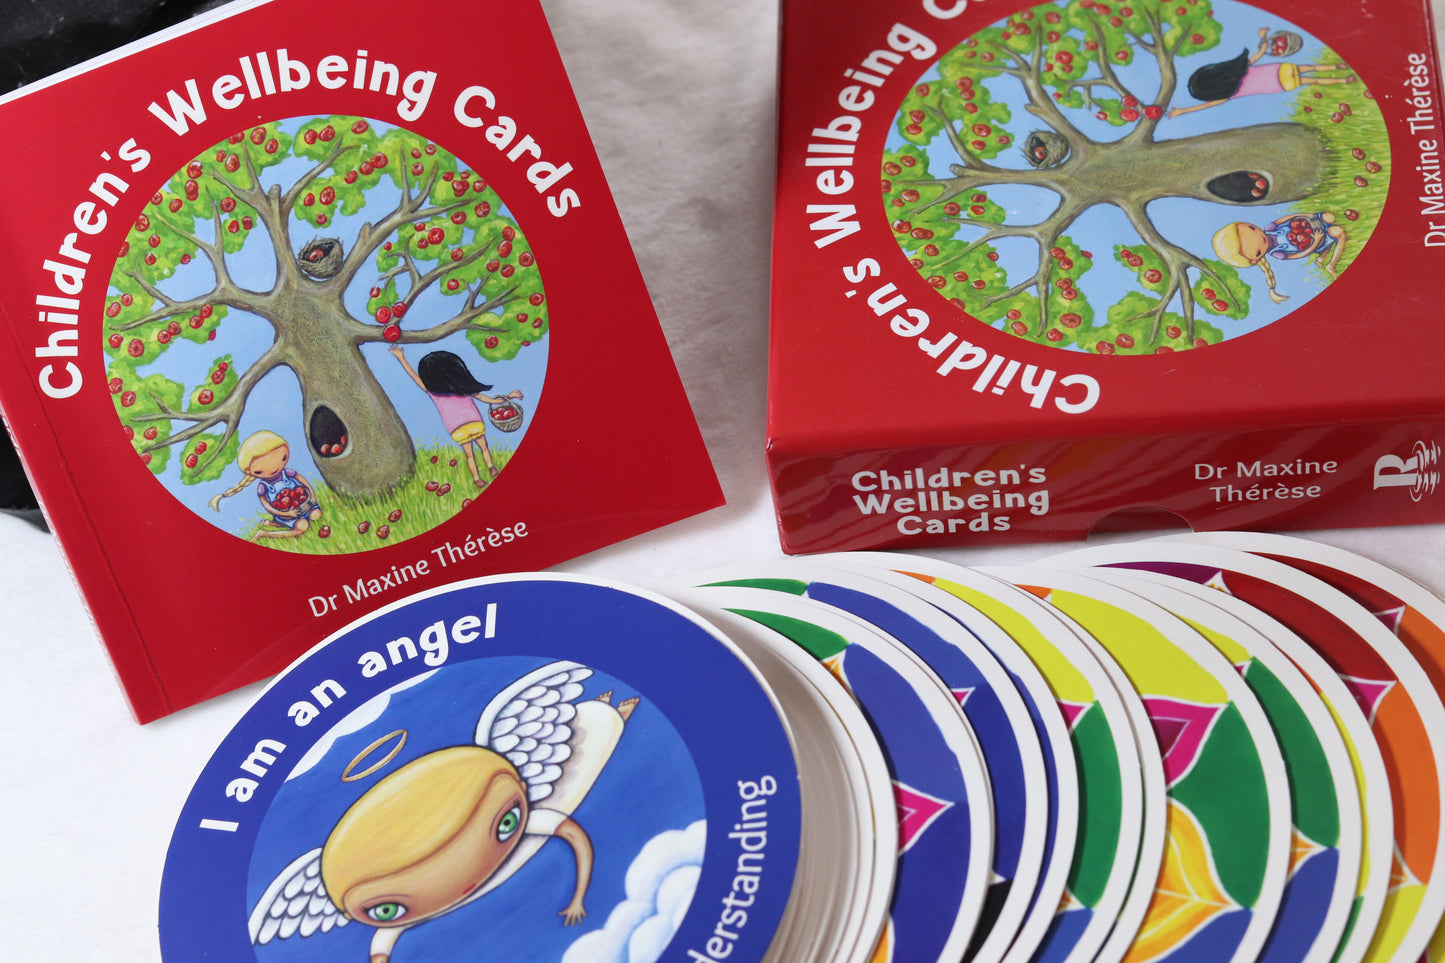 Well-Being cards for children